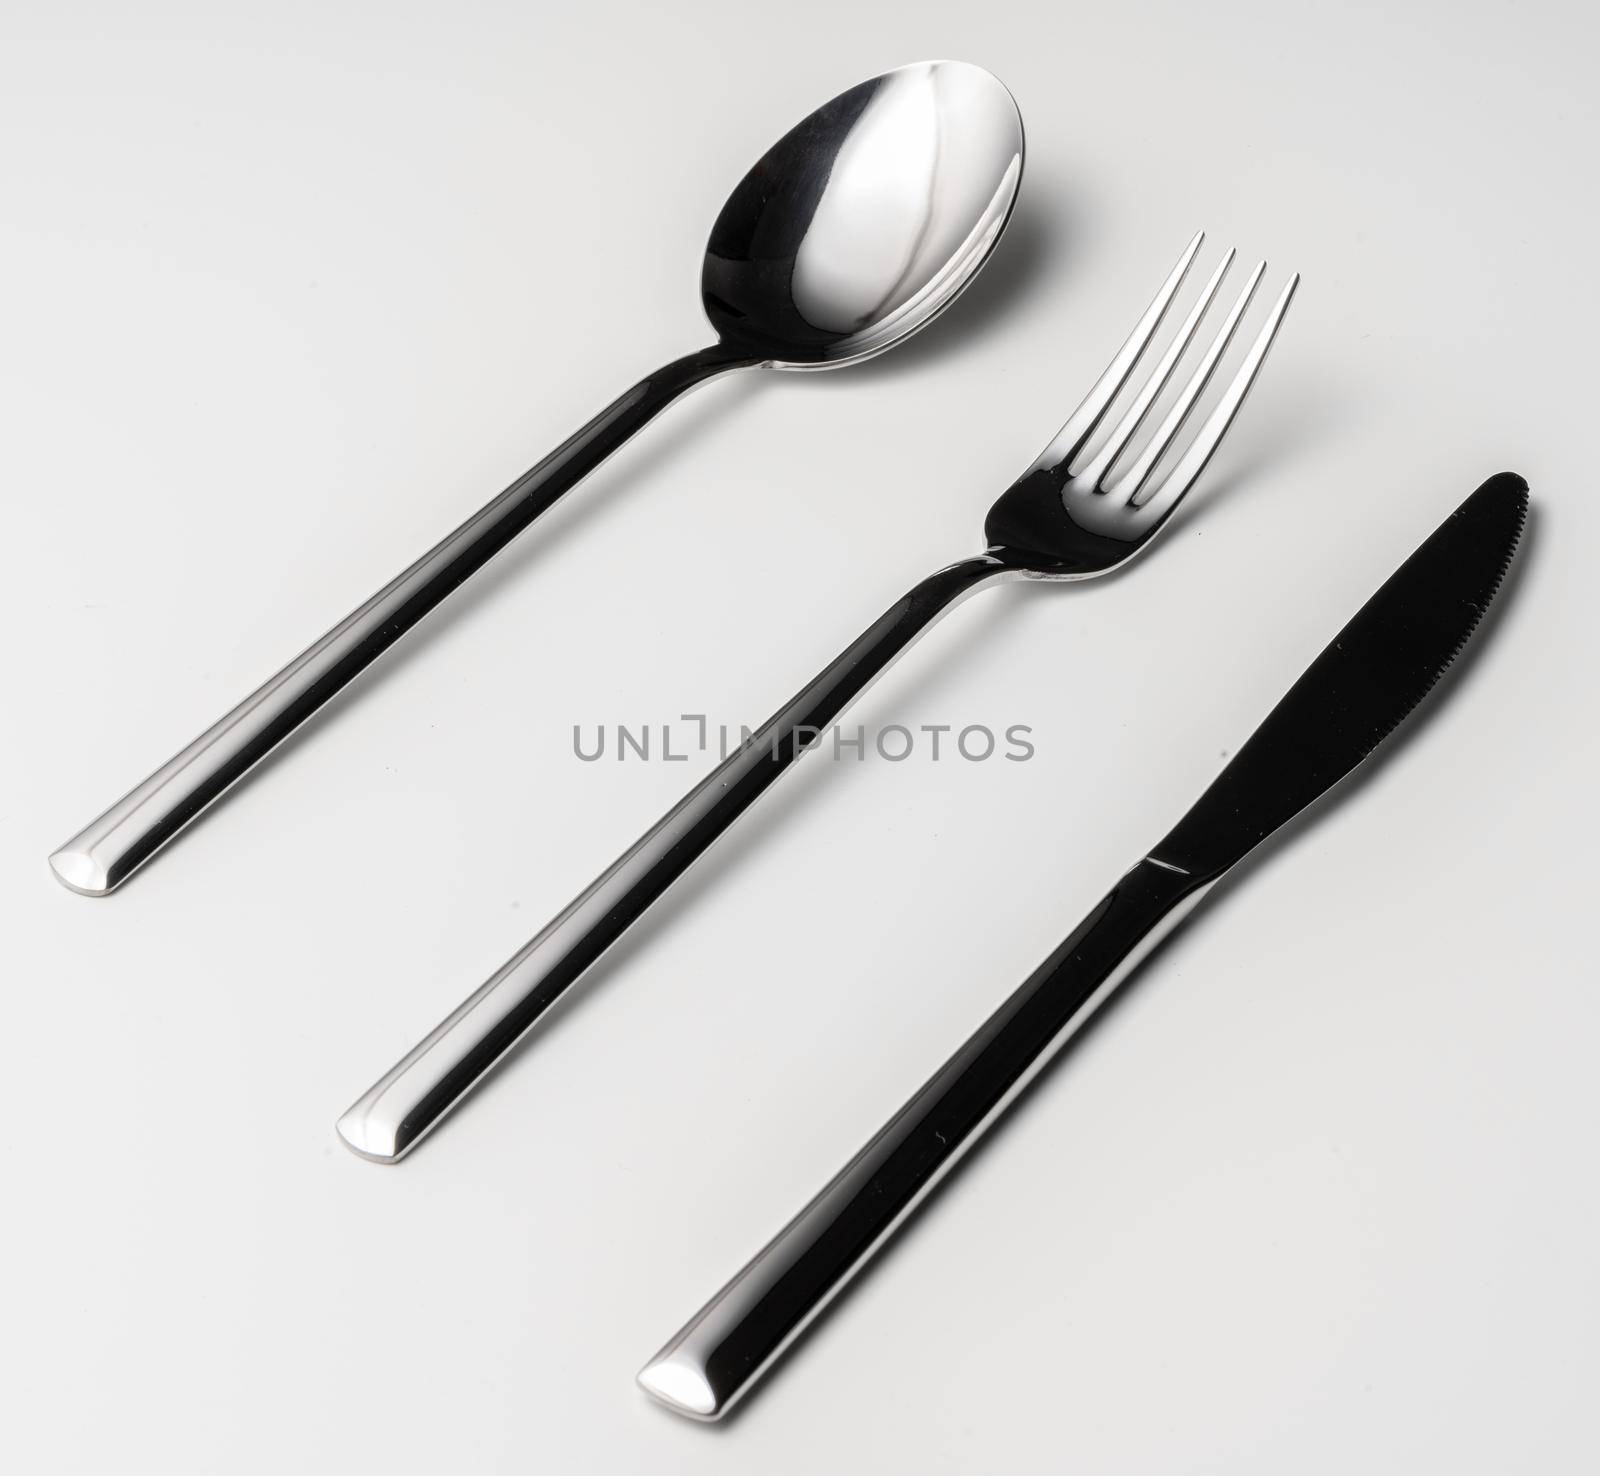 Spoon, fork and knife on a white background. High quality photo